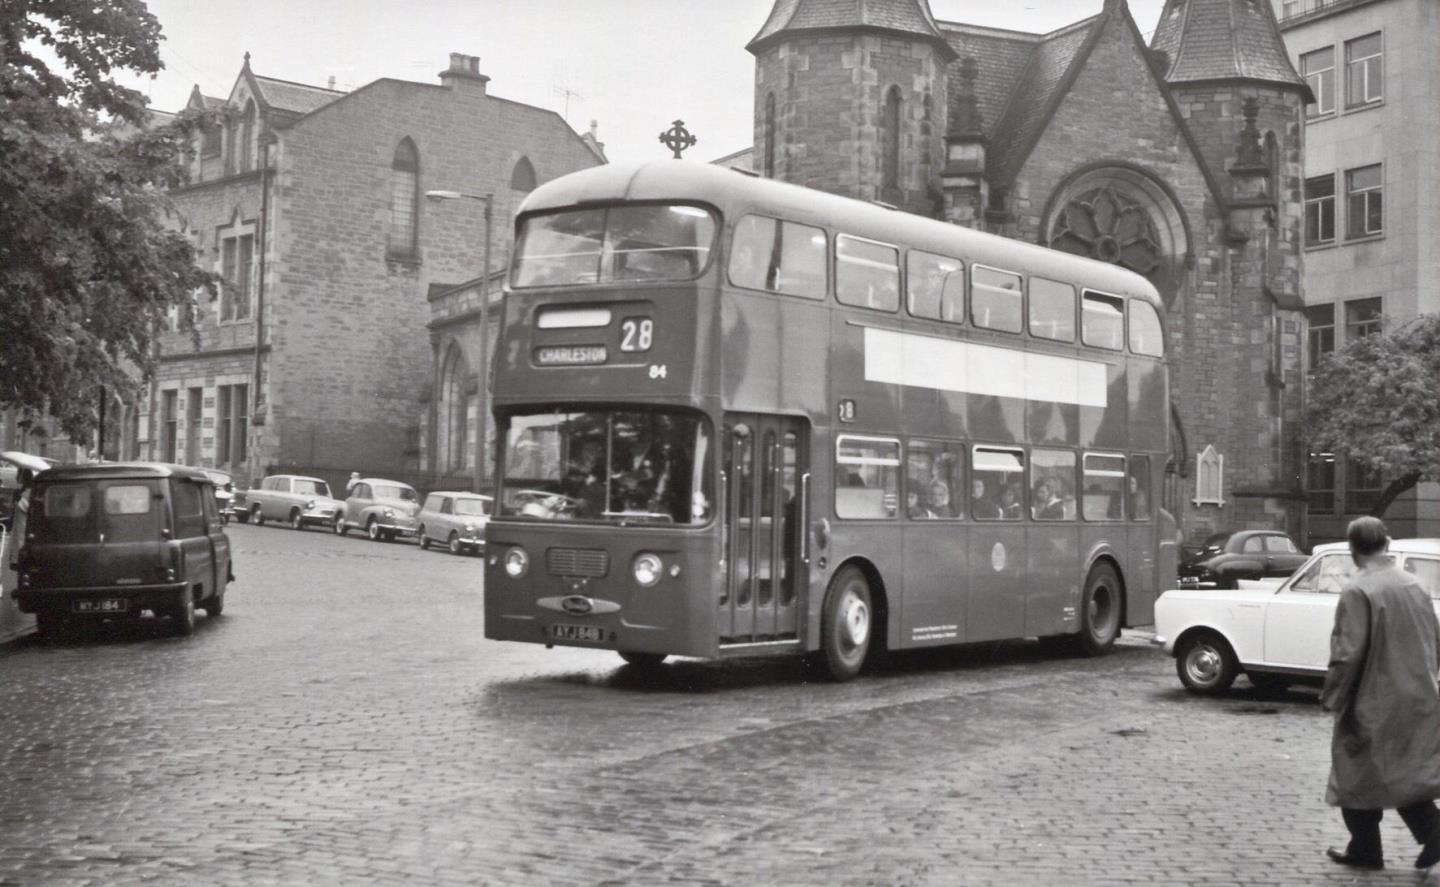 this bus was revolutionary for its time - like hte dundee electric buses of today!